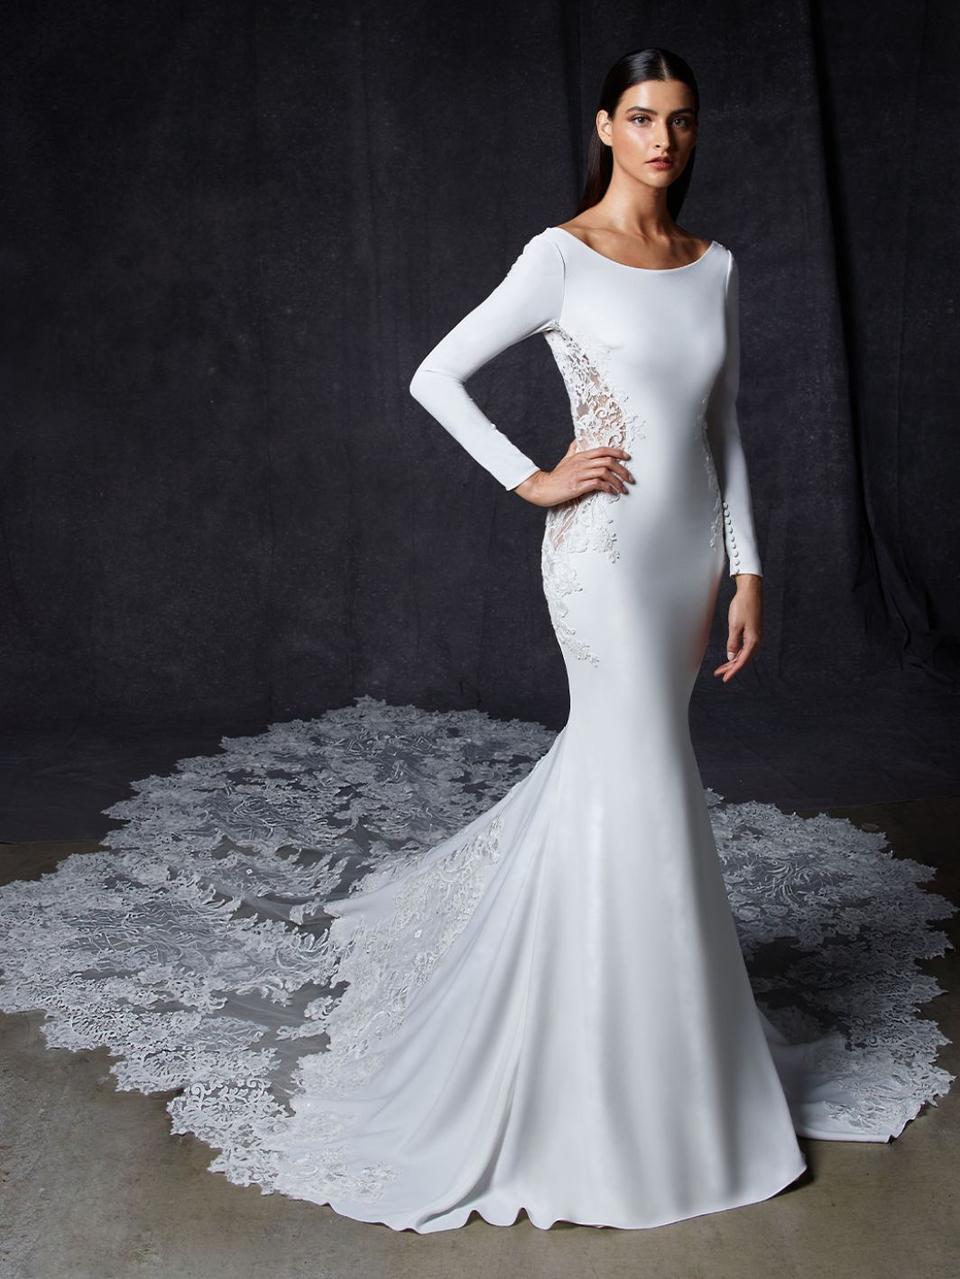 Second Marriage Wedding Dresses: 27 Fashion-Editor Approved Options ...